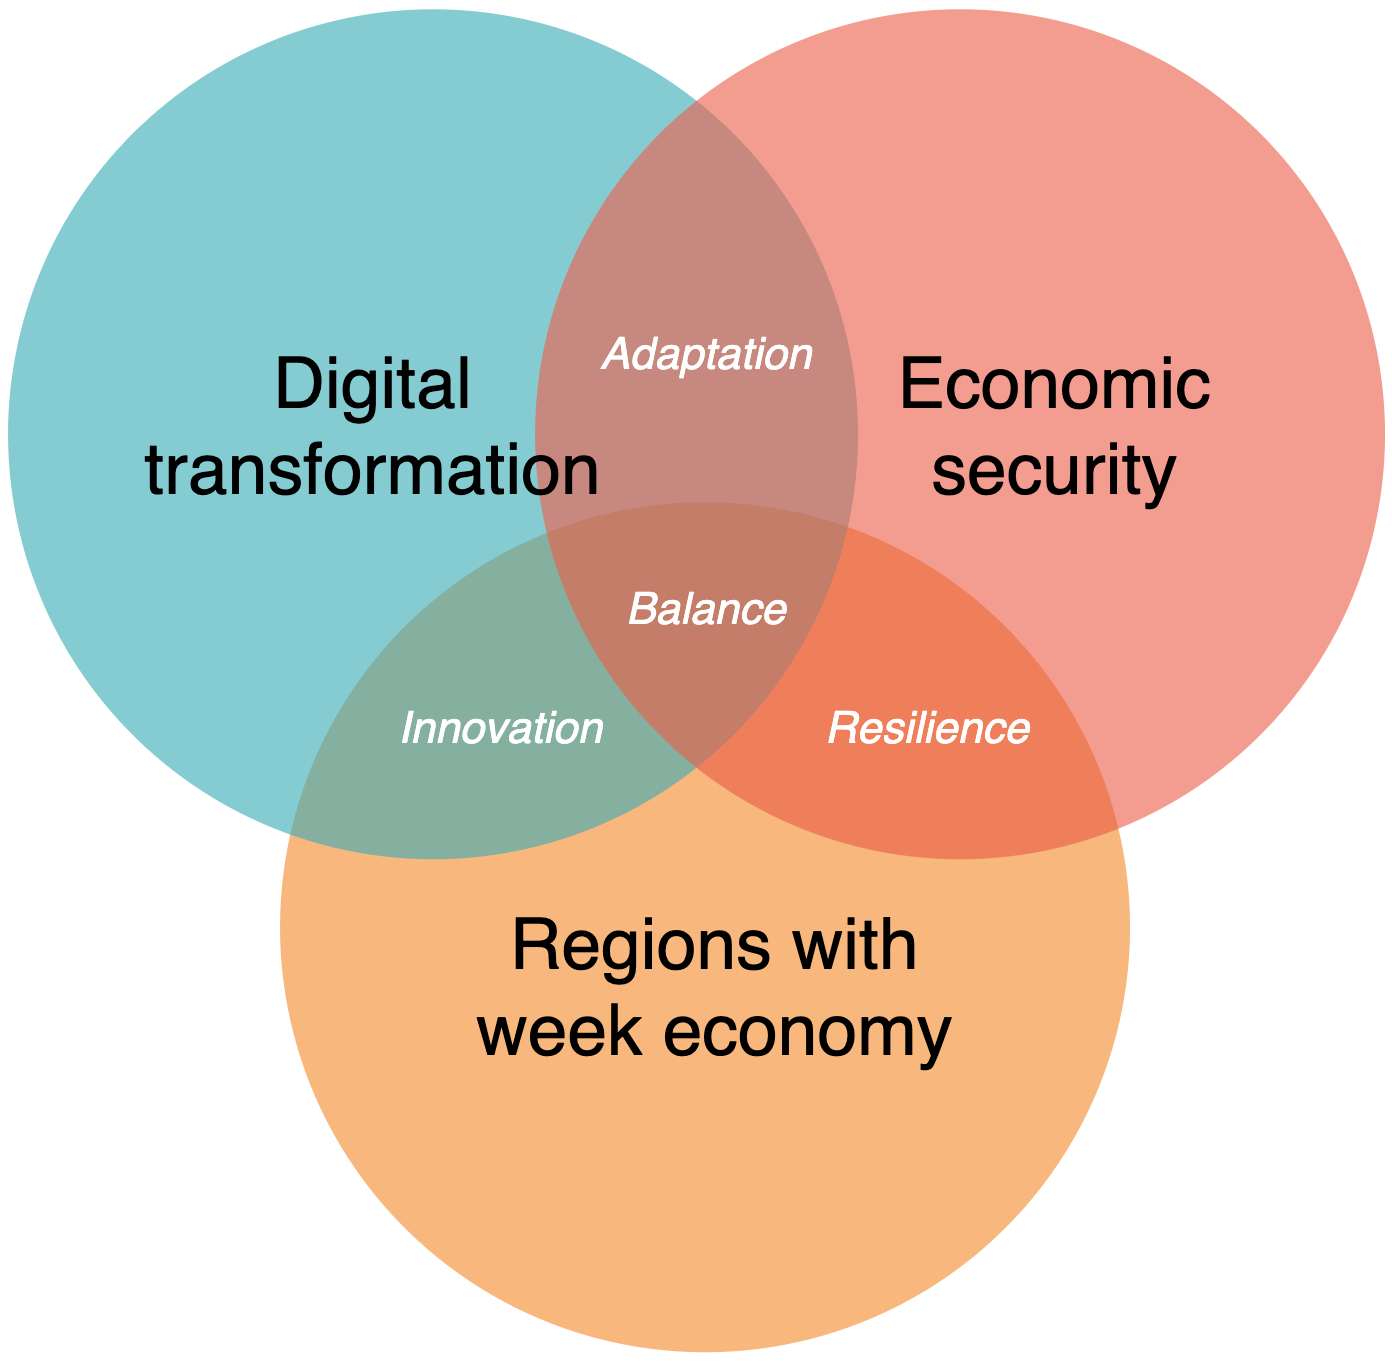 Index terms: Digital transformation; Economic security; Regions with weak economy; Management; Resilience